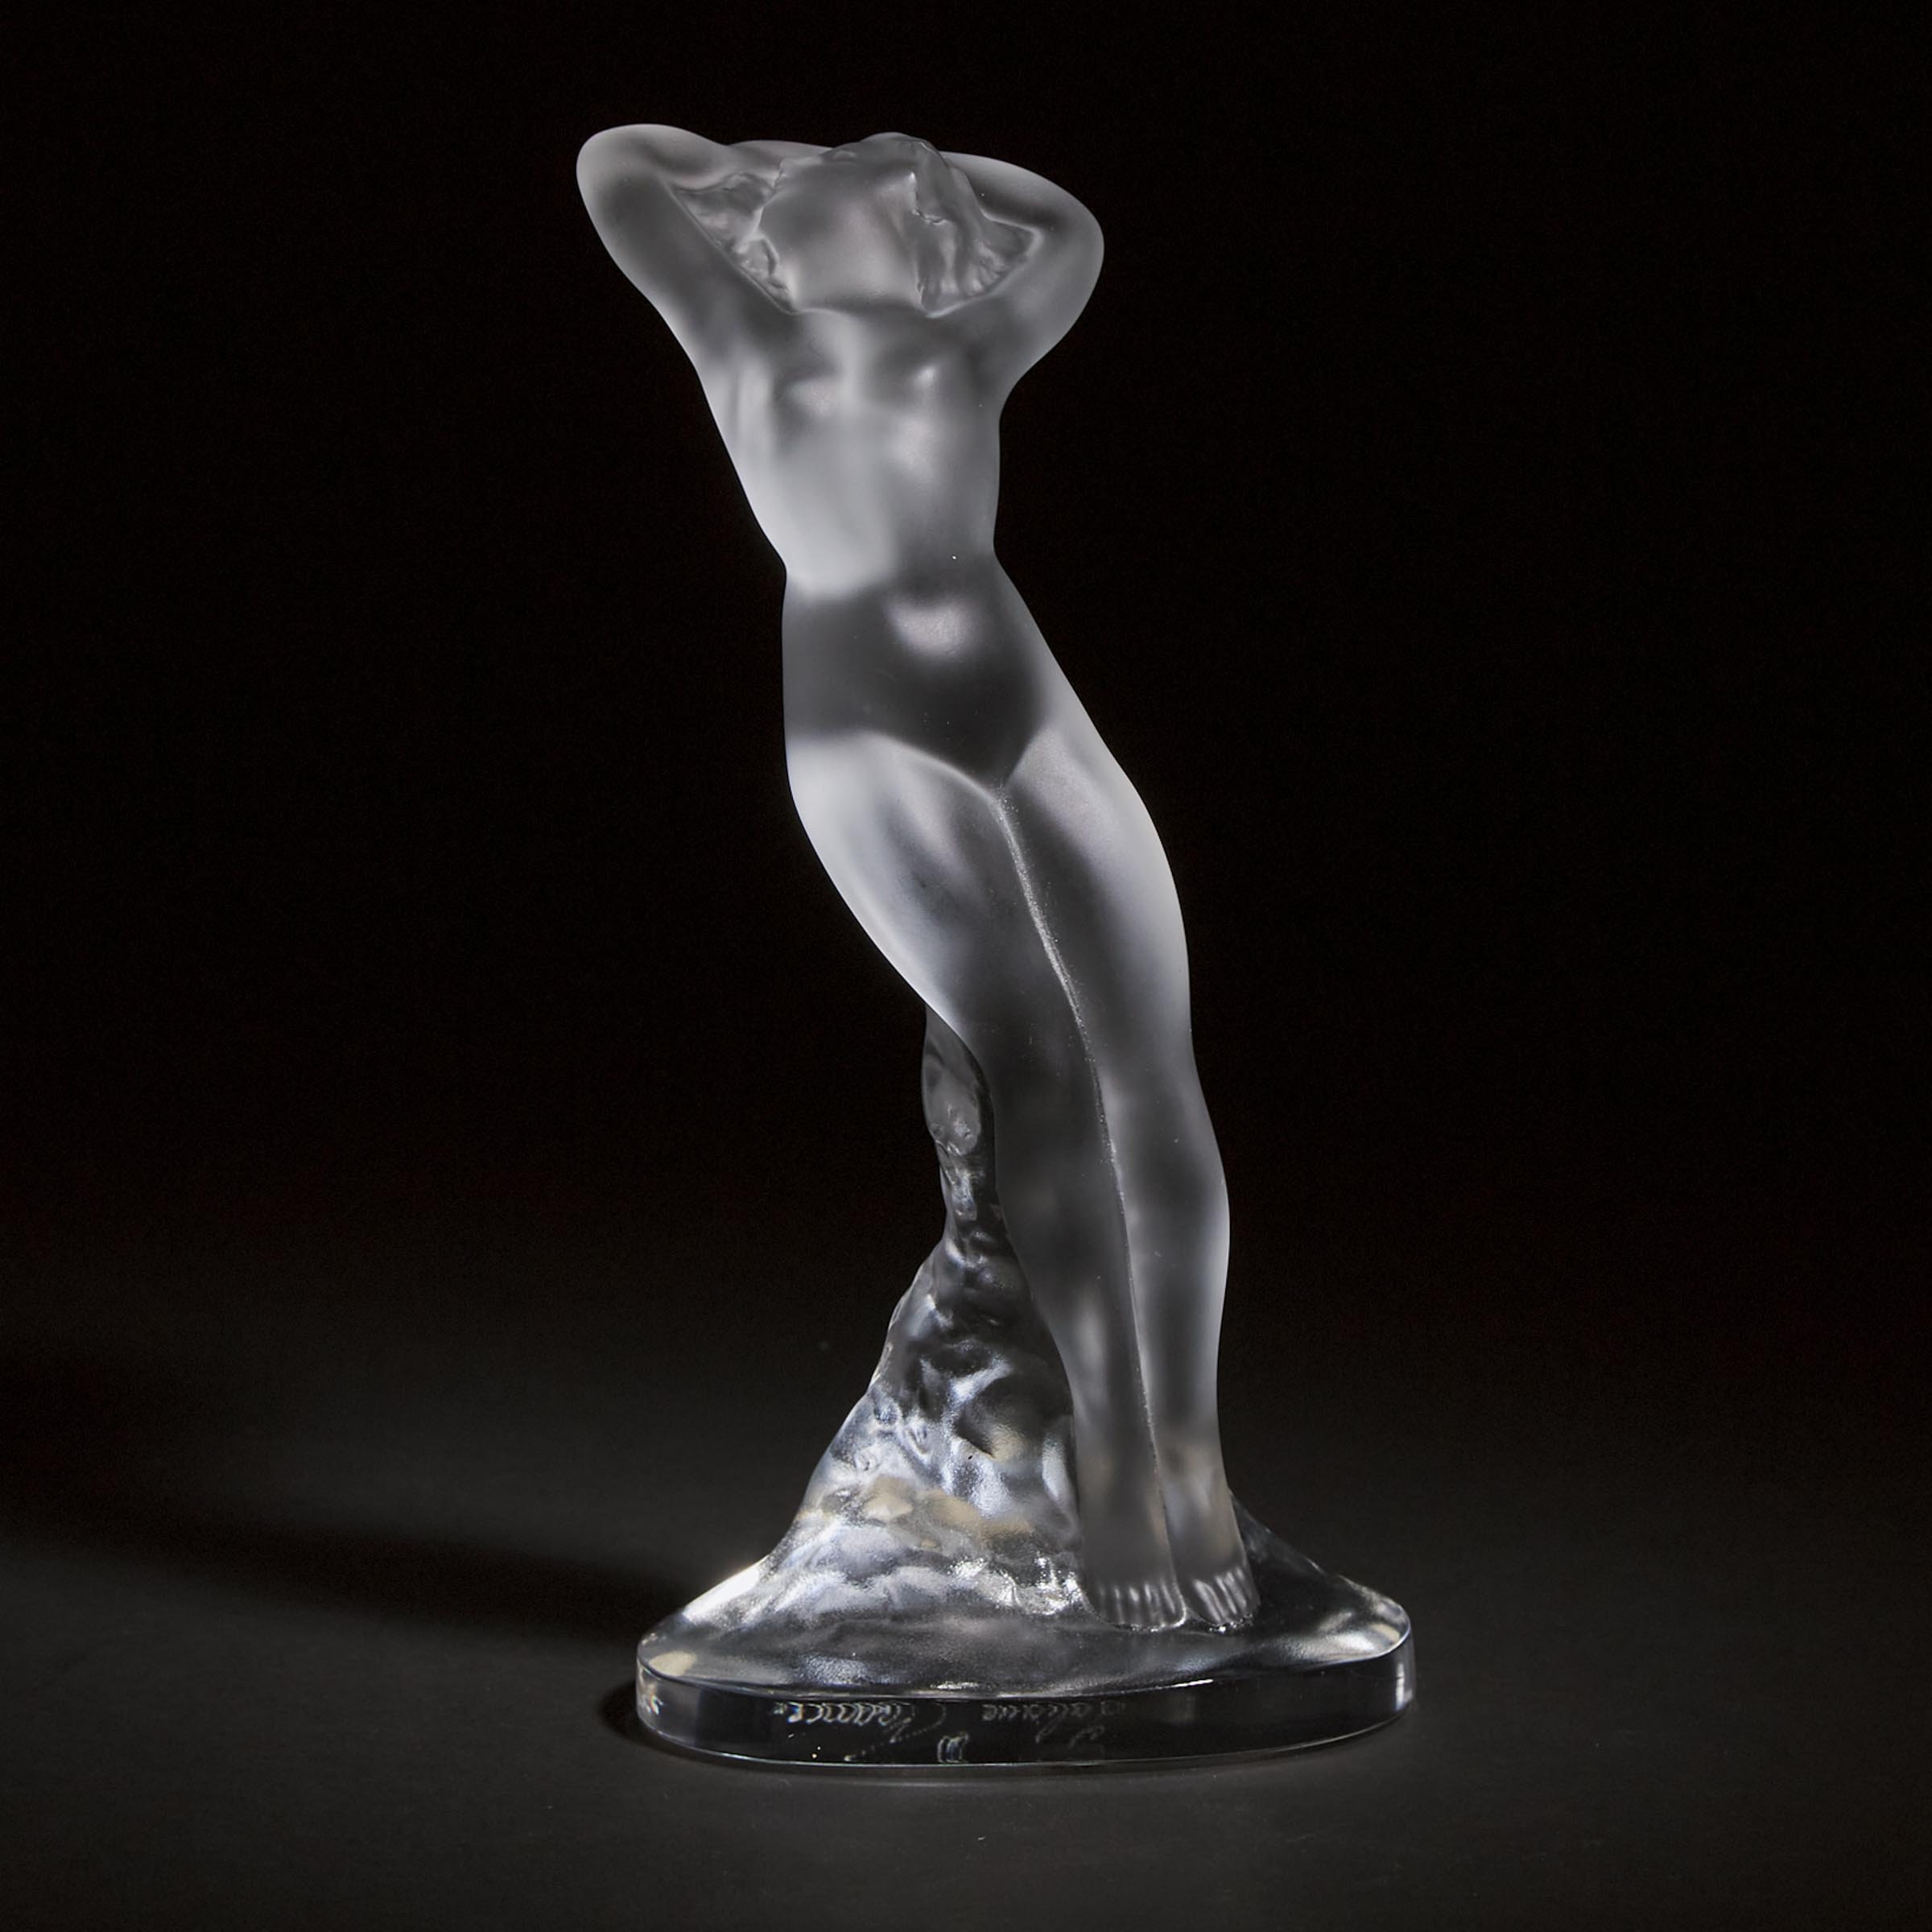 'Danseuse Bras Levés', Lalique Moulded and Frosted Glass Figure, post-1978